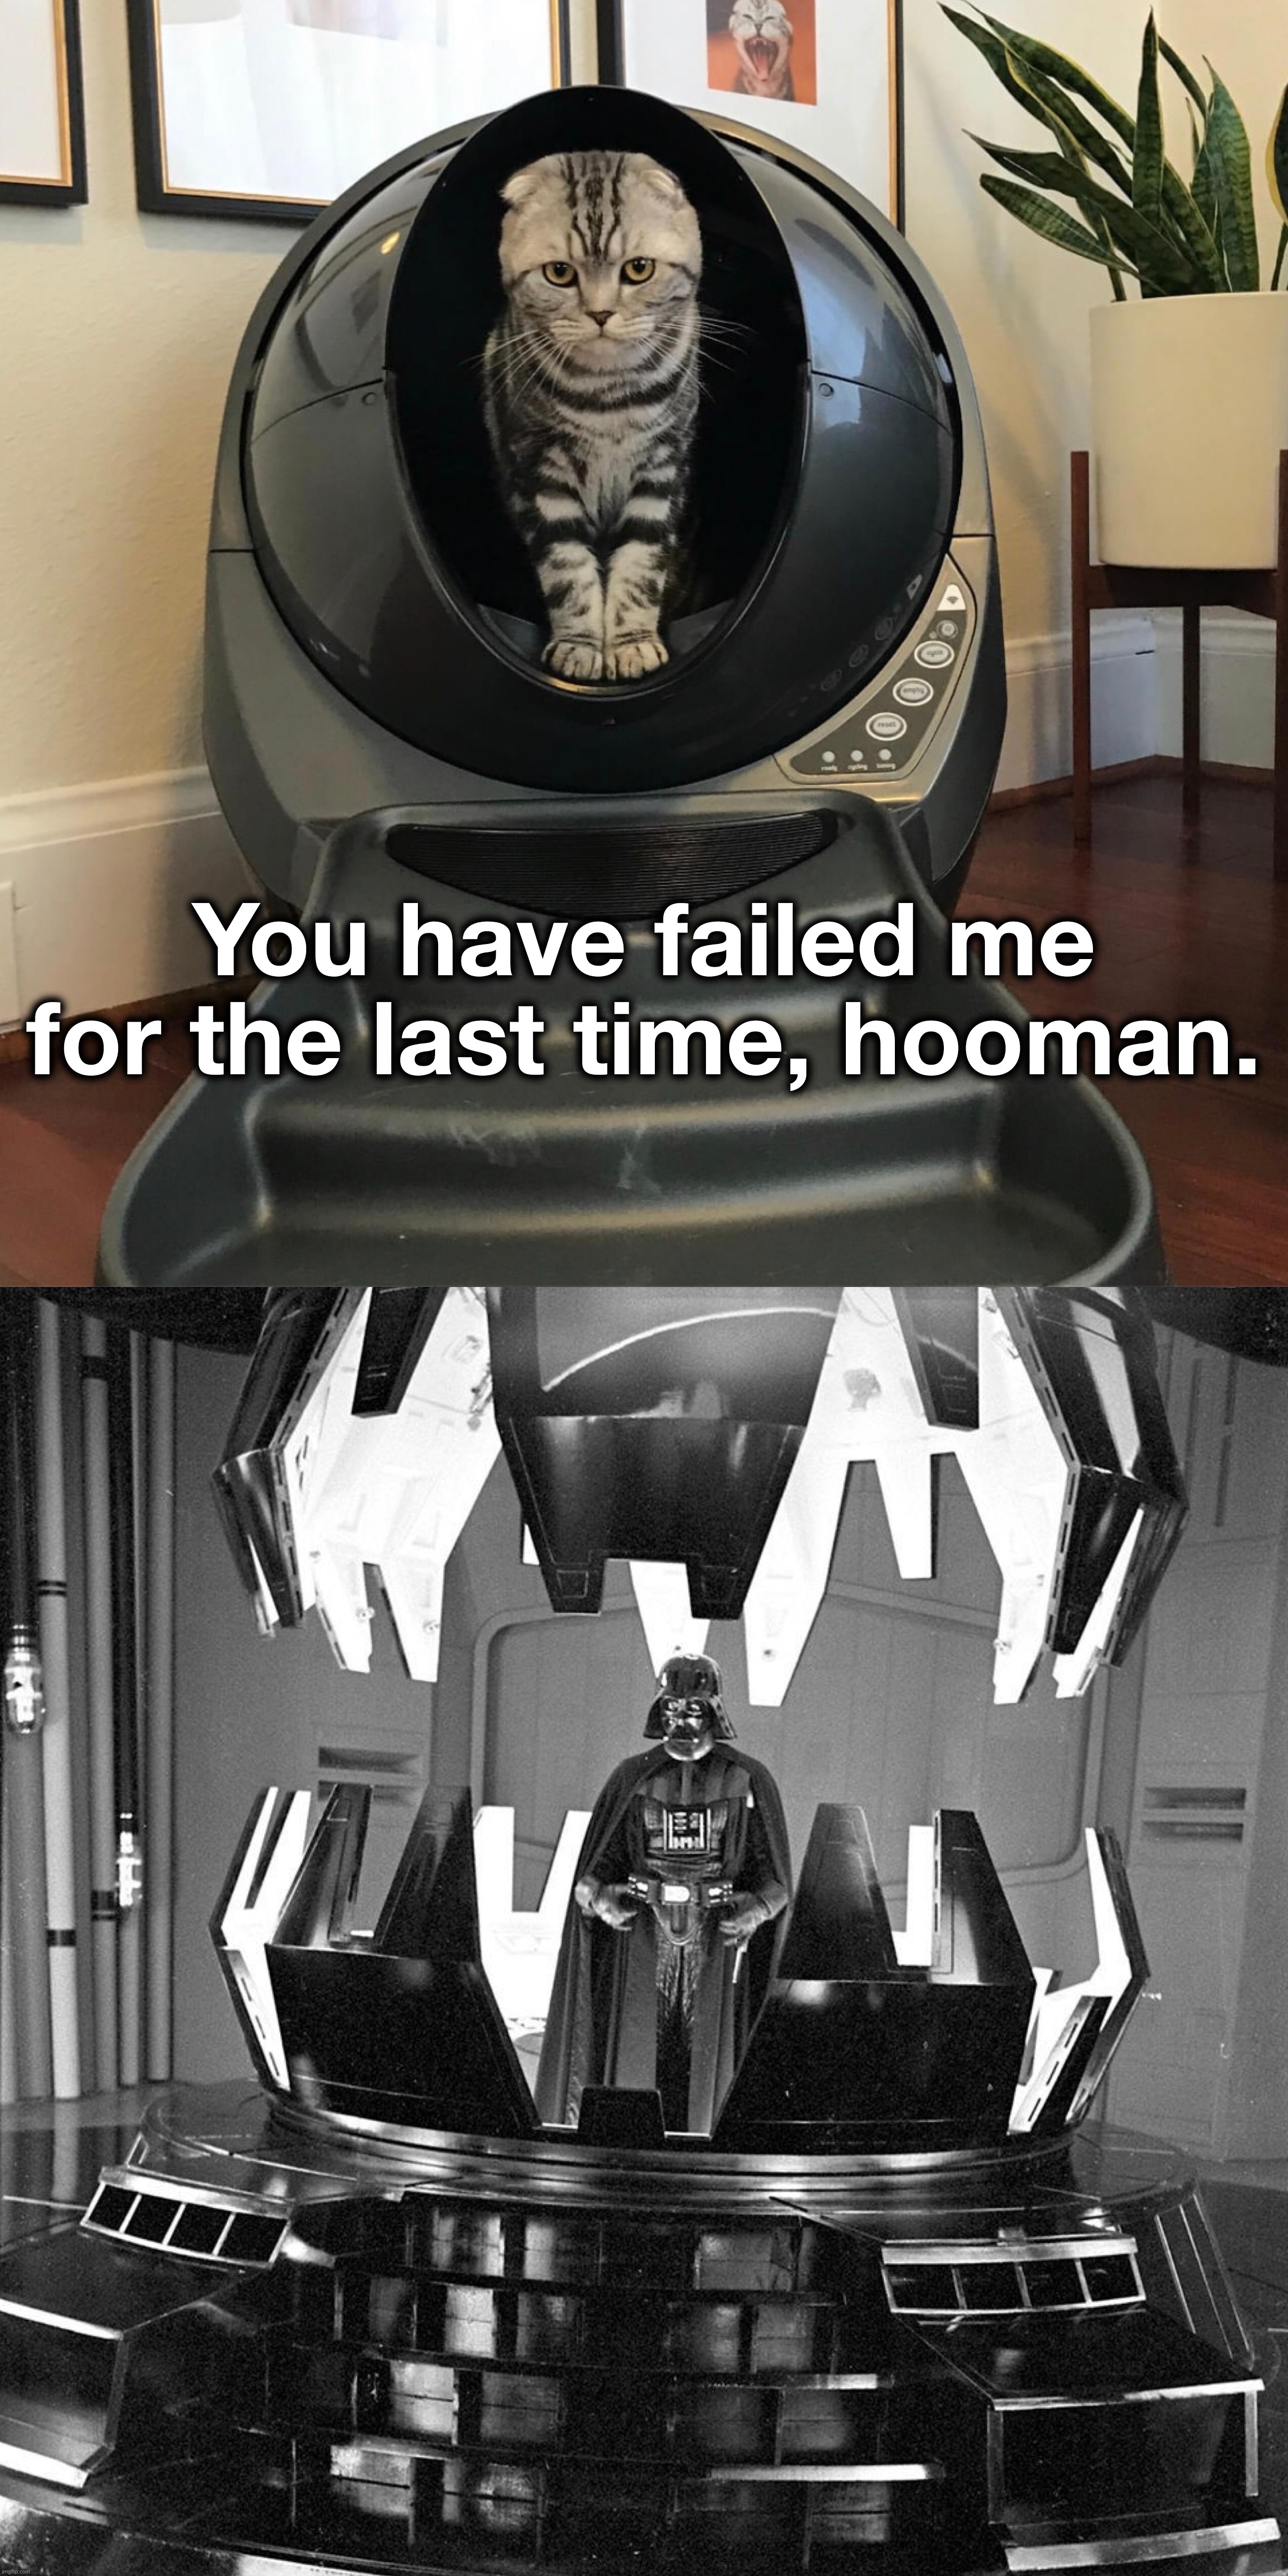 Join the Dark Side, we have kitties! | You have failed me for the last time, hooman. | image tagged in darth vader,darth vader - come to the dark side,dark side,star wars,kitties,cat | made w/ Imgflip meme maker